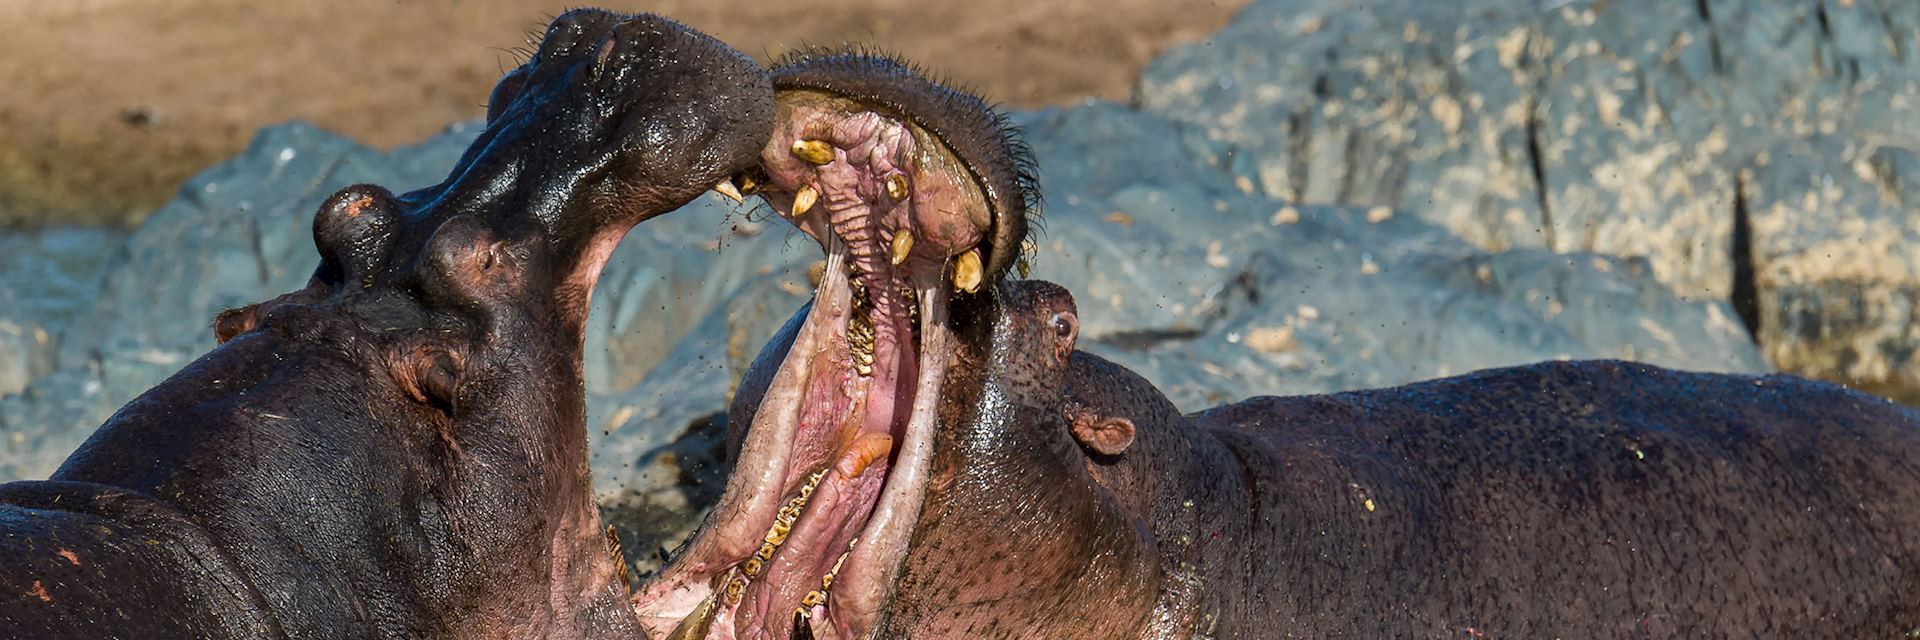 While a common sight, hippos fighting over either territory or a mate rarely result in death